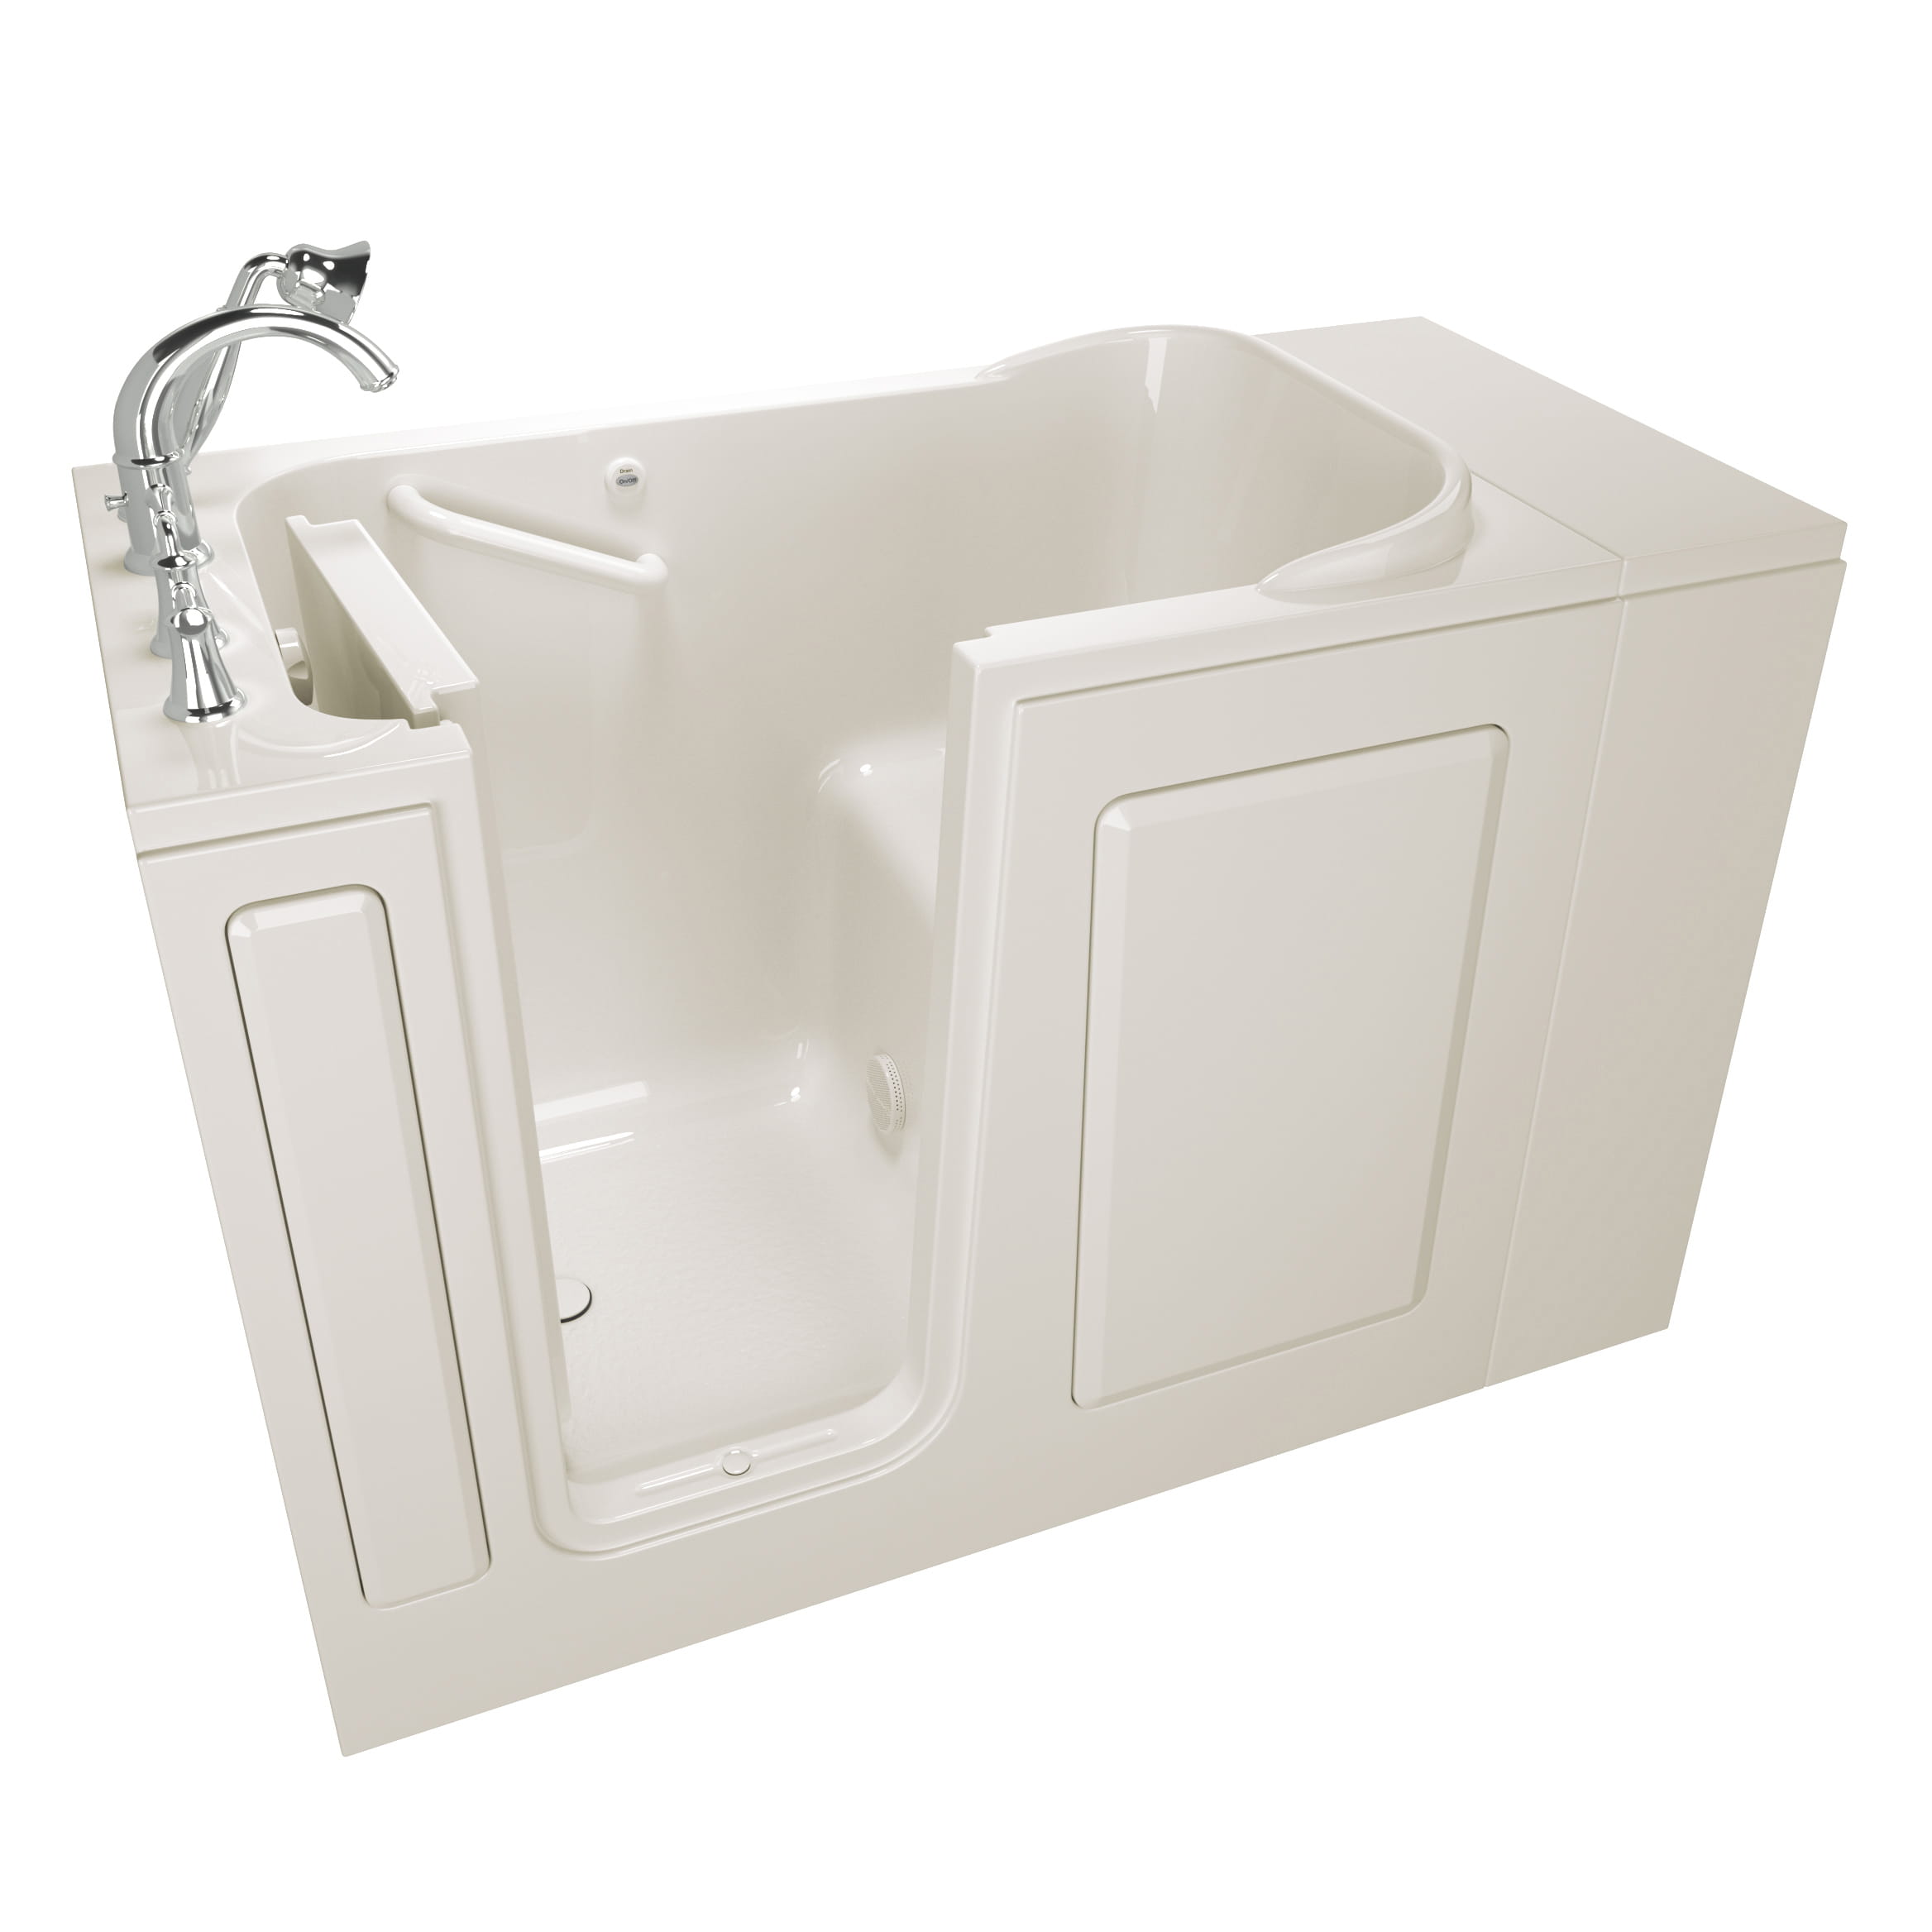 Gelcoat Value Series 28 x 48-Inch Walk-in Tub With Soaker System - Left-Hand Drain With Faucet